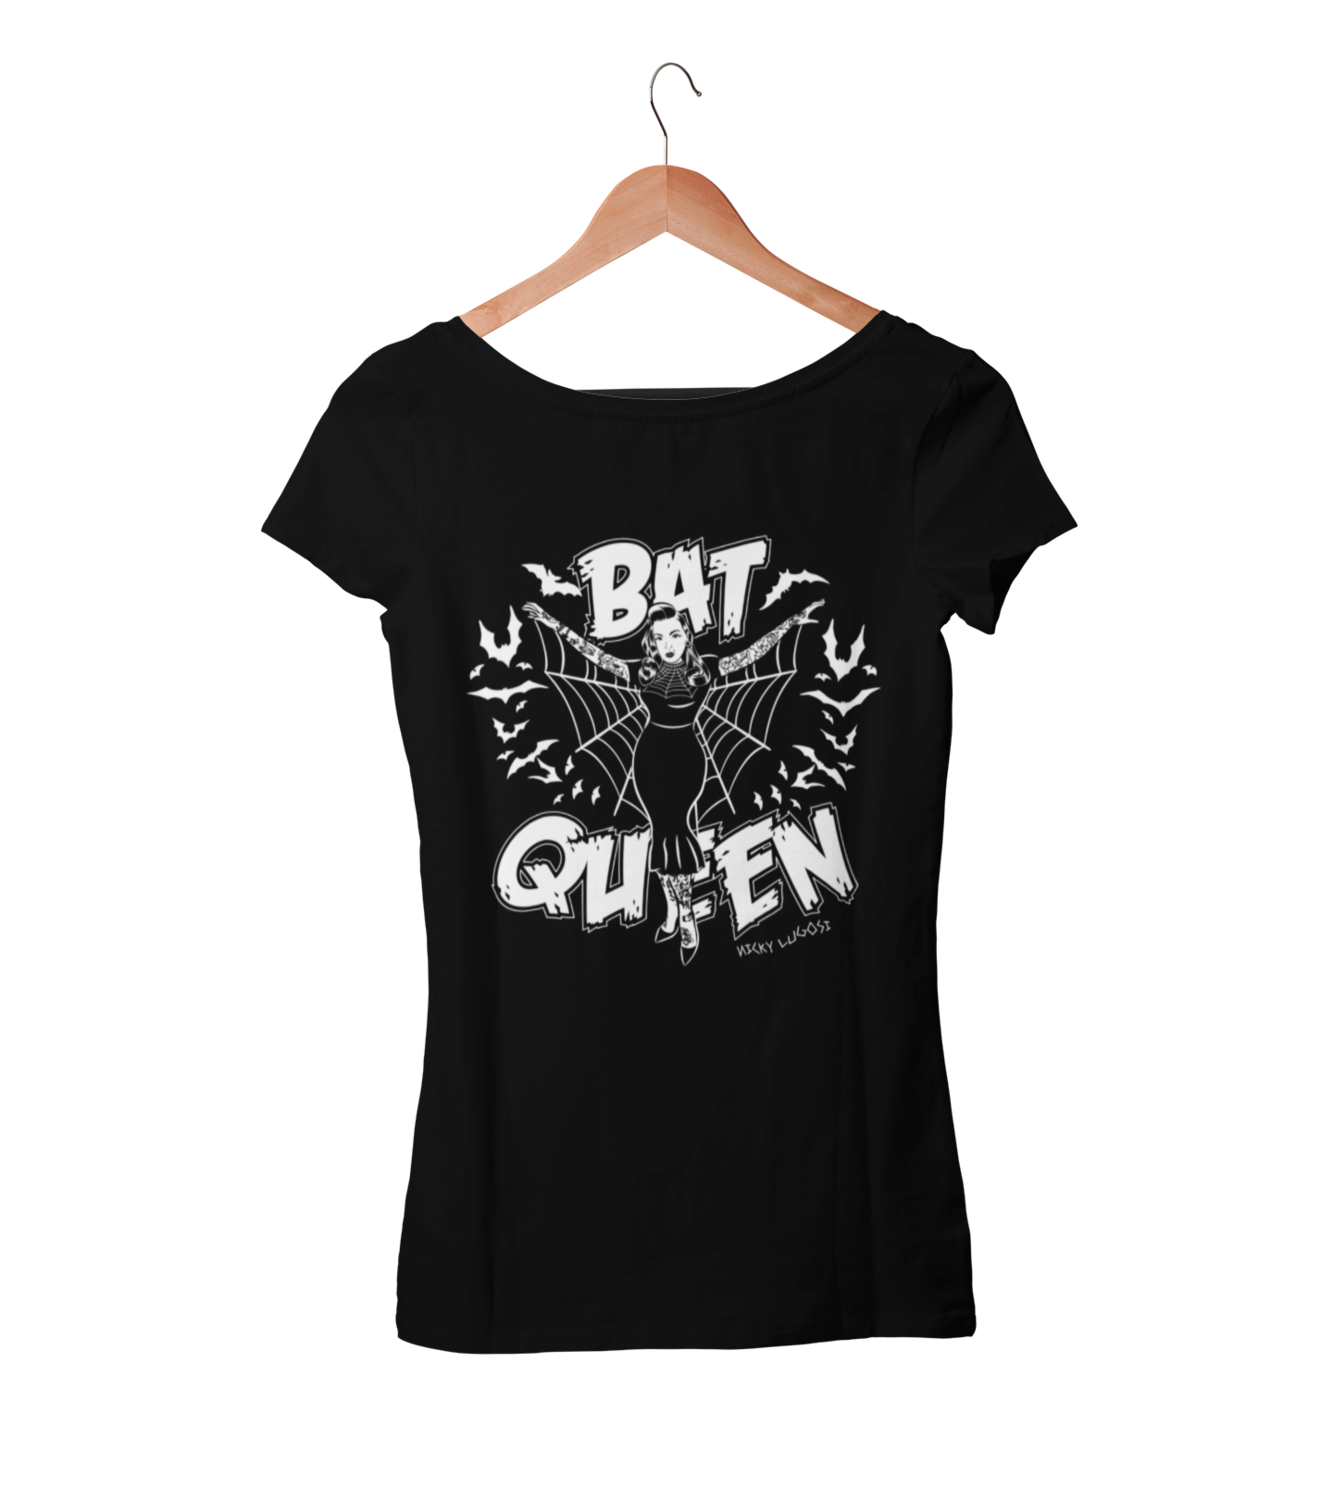 BAT QUEEN by MISS MOONAGE tshirt for WOMEN